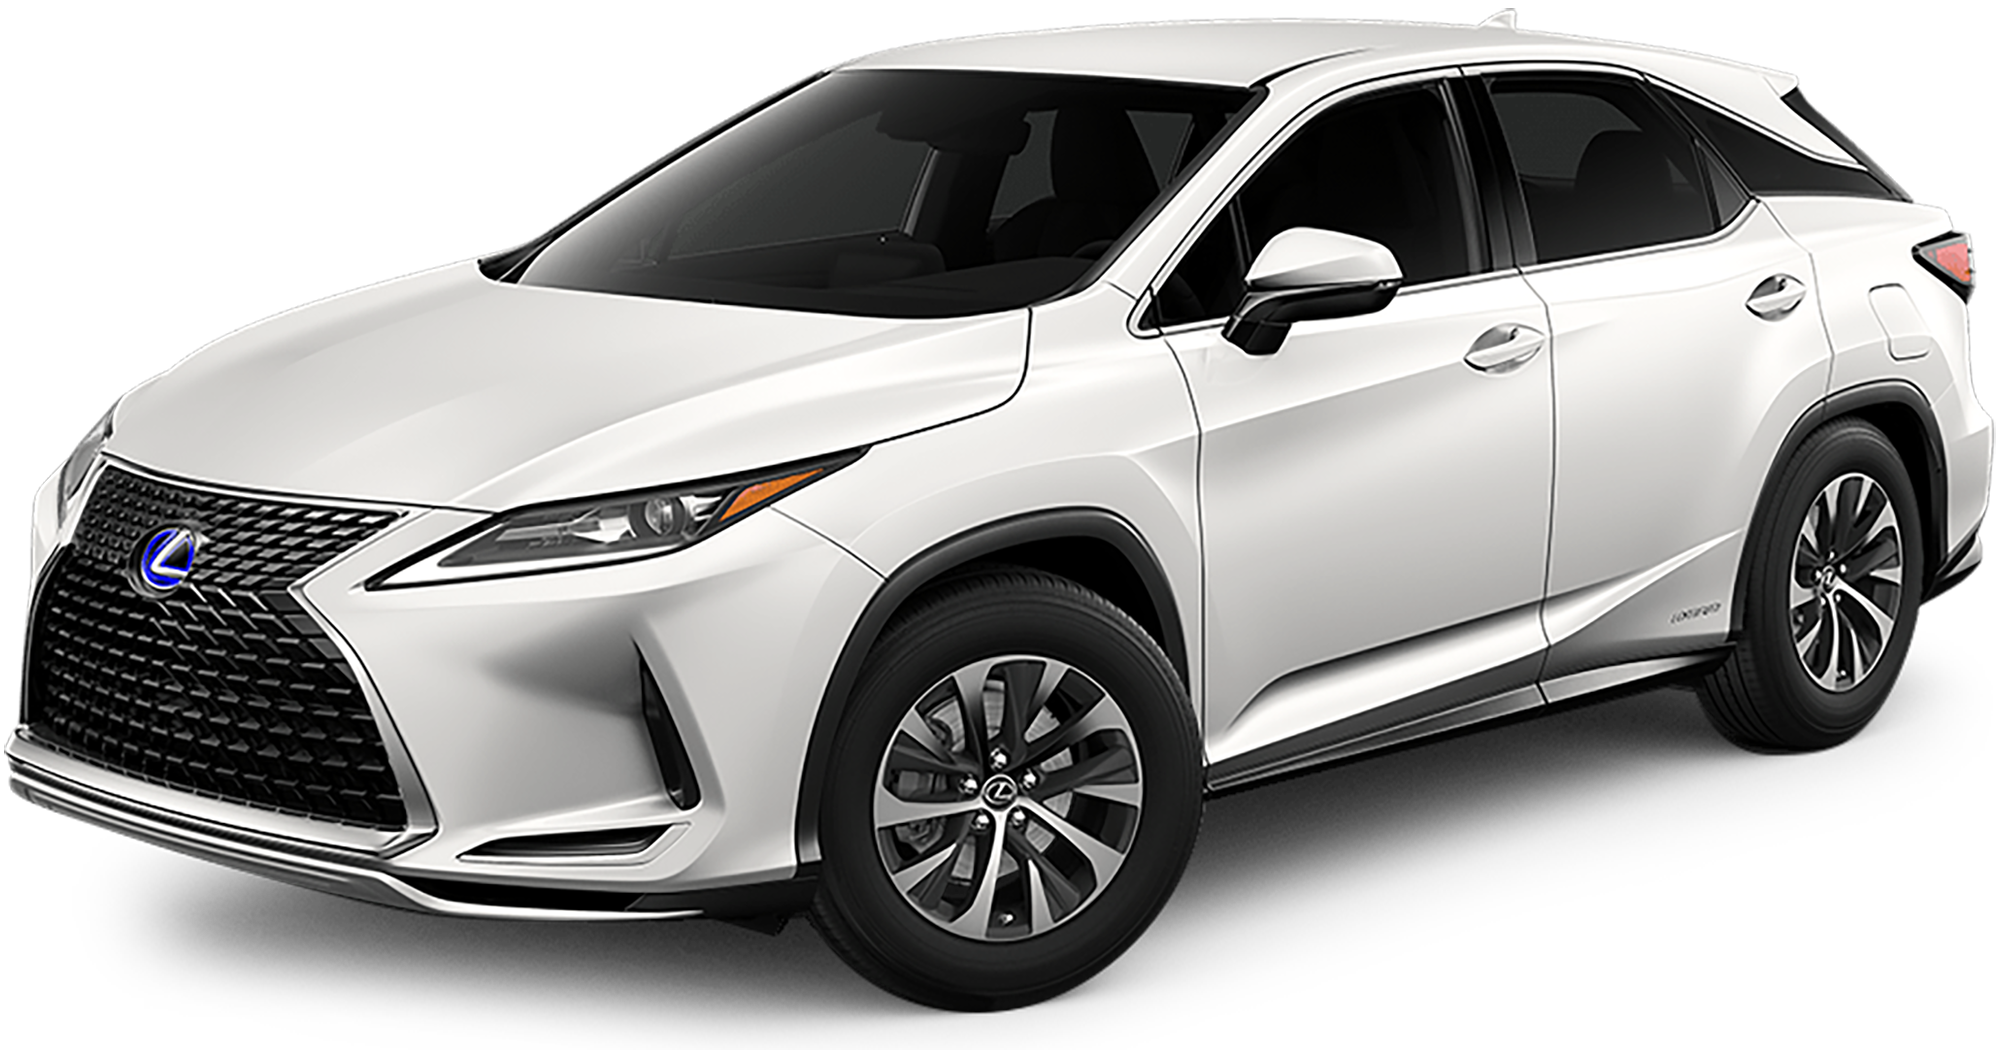 2021 Lexus RX 450hL Incentives, Specials & Offers in Duluth GA